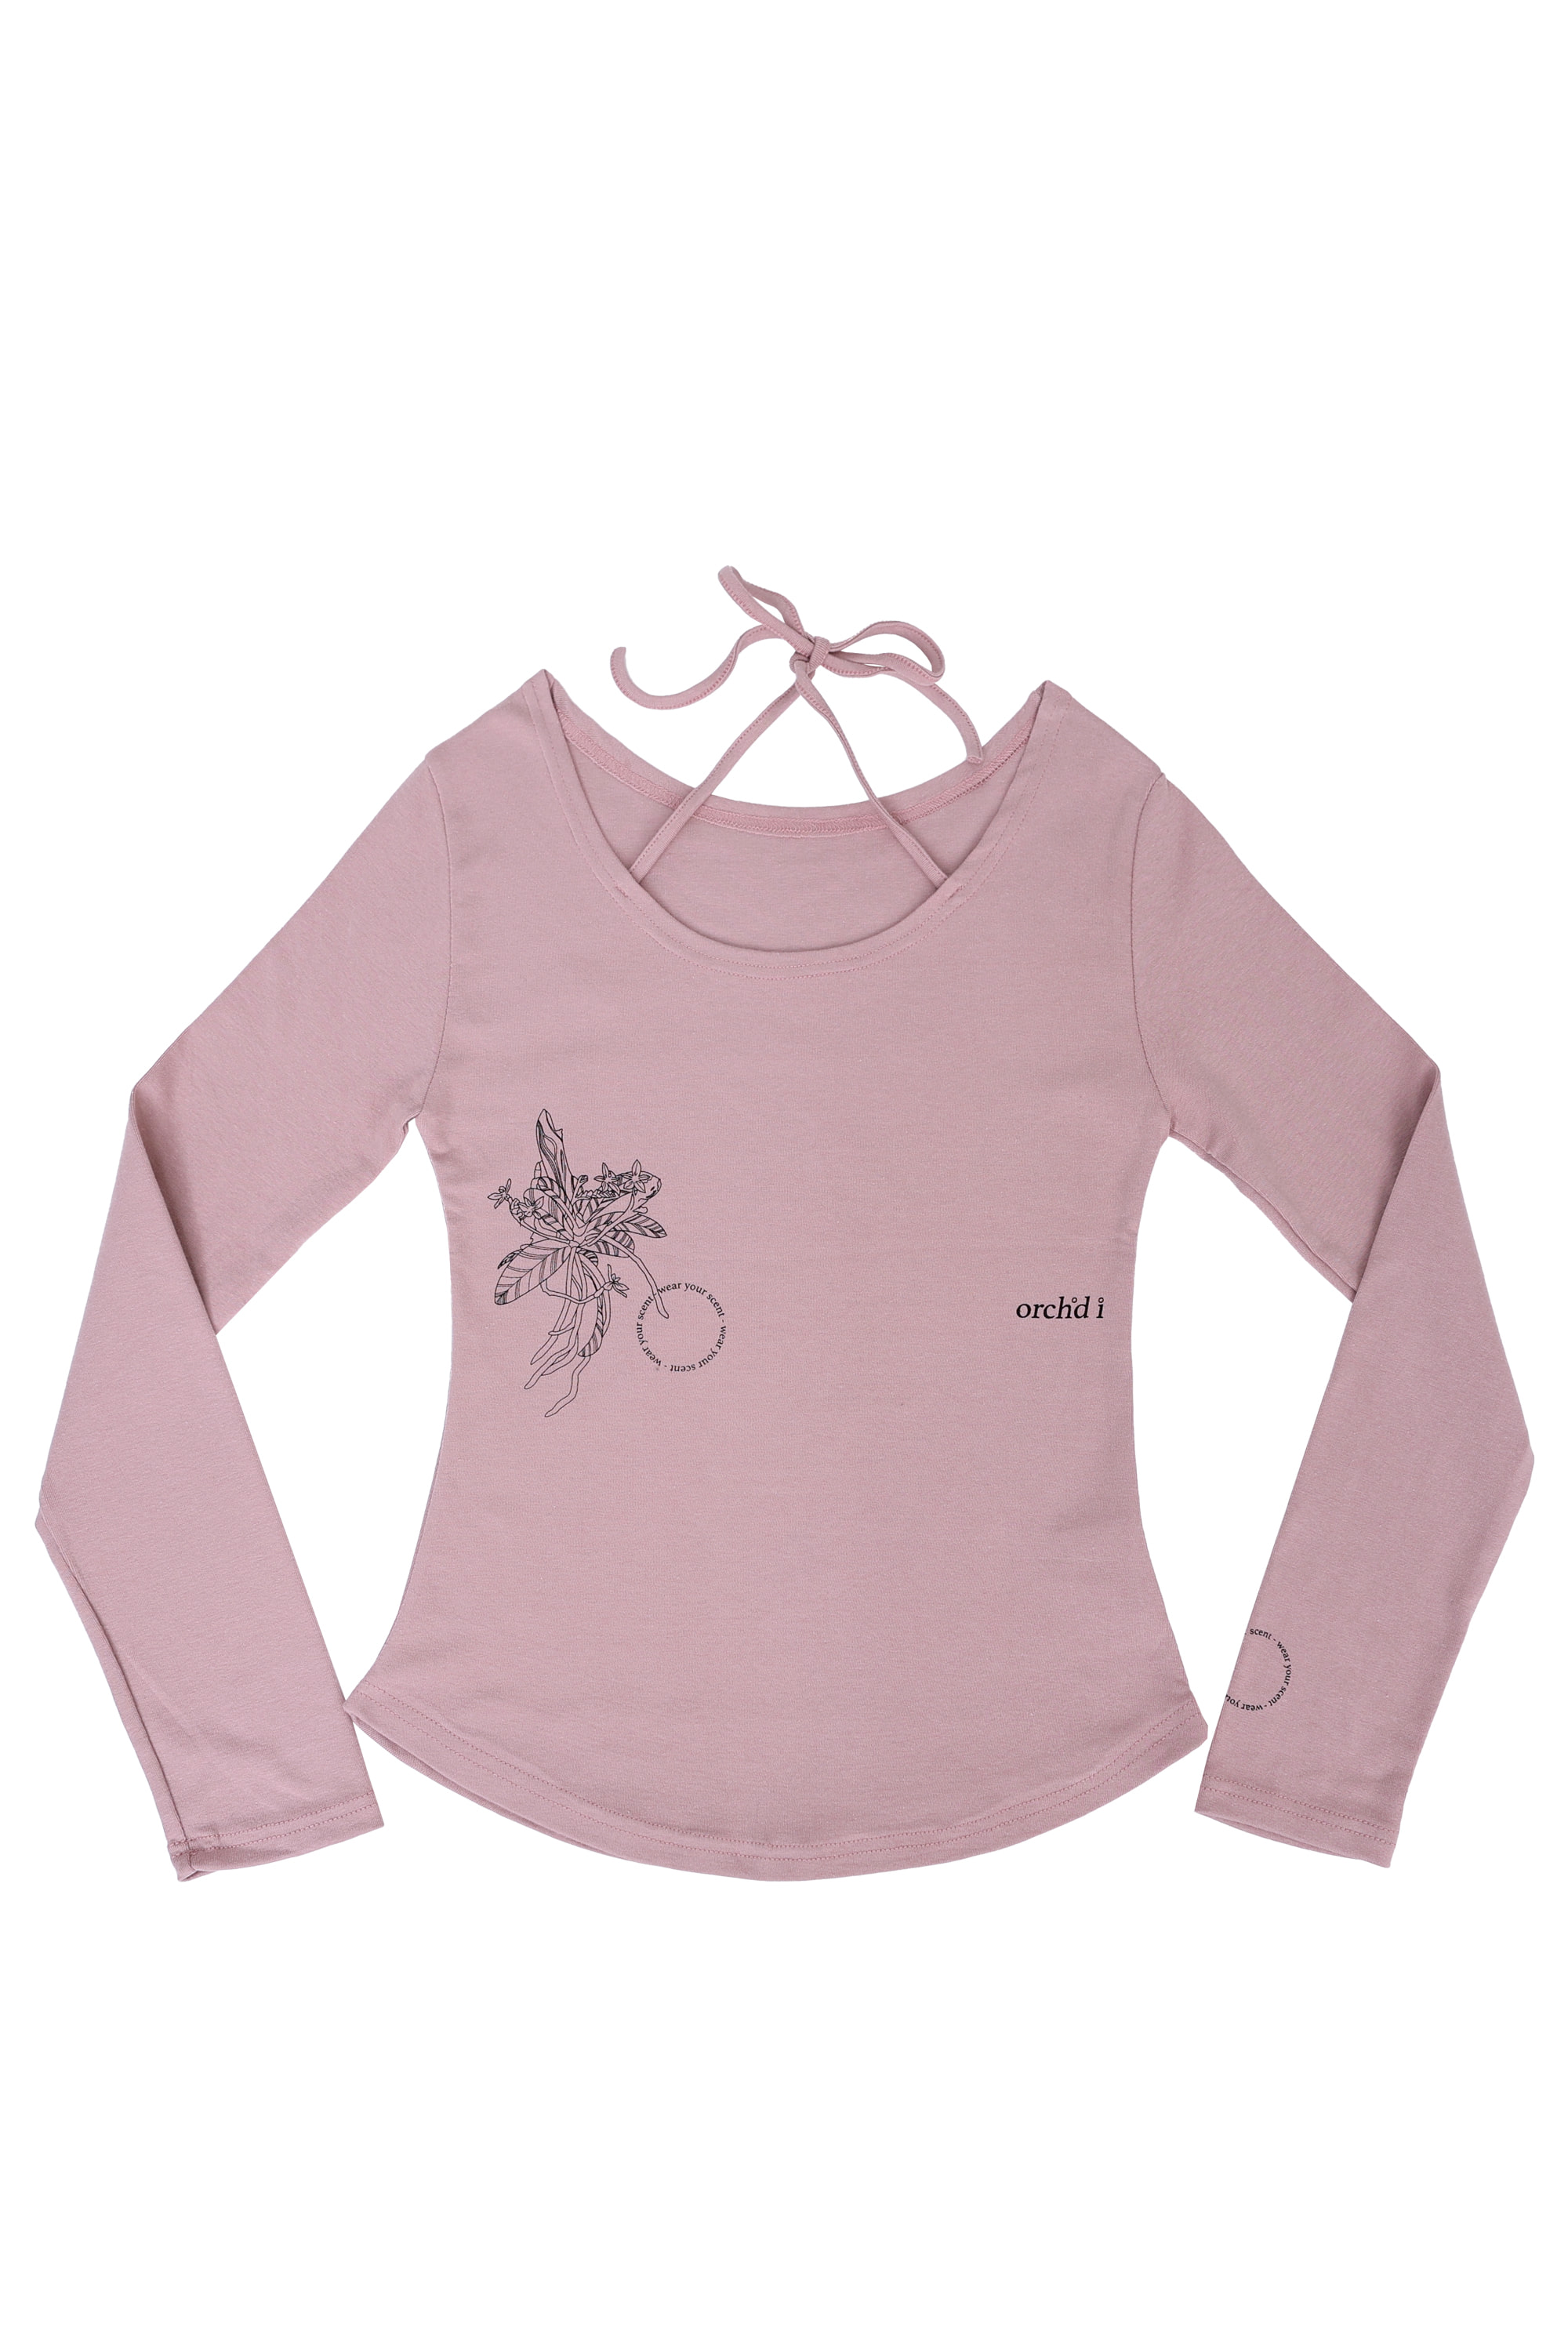 orchid letter tee (dusty pink)